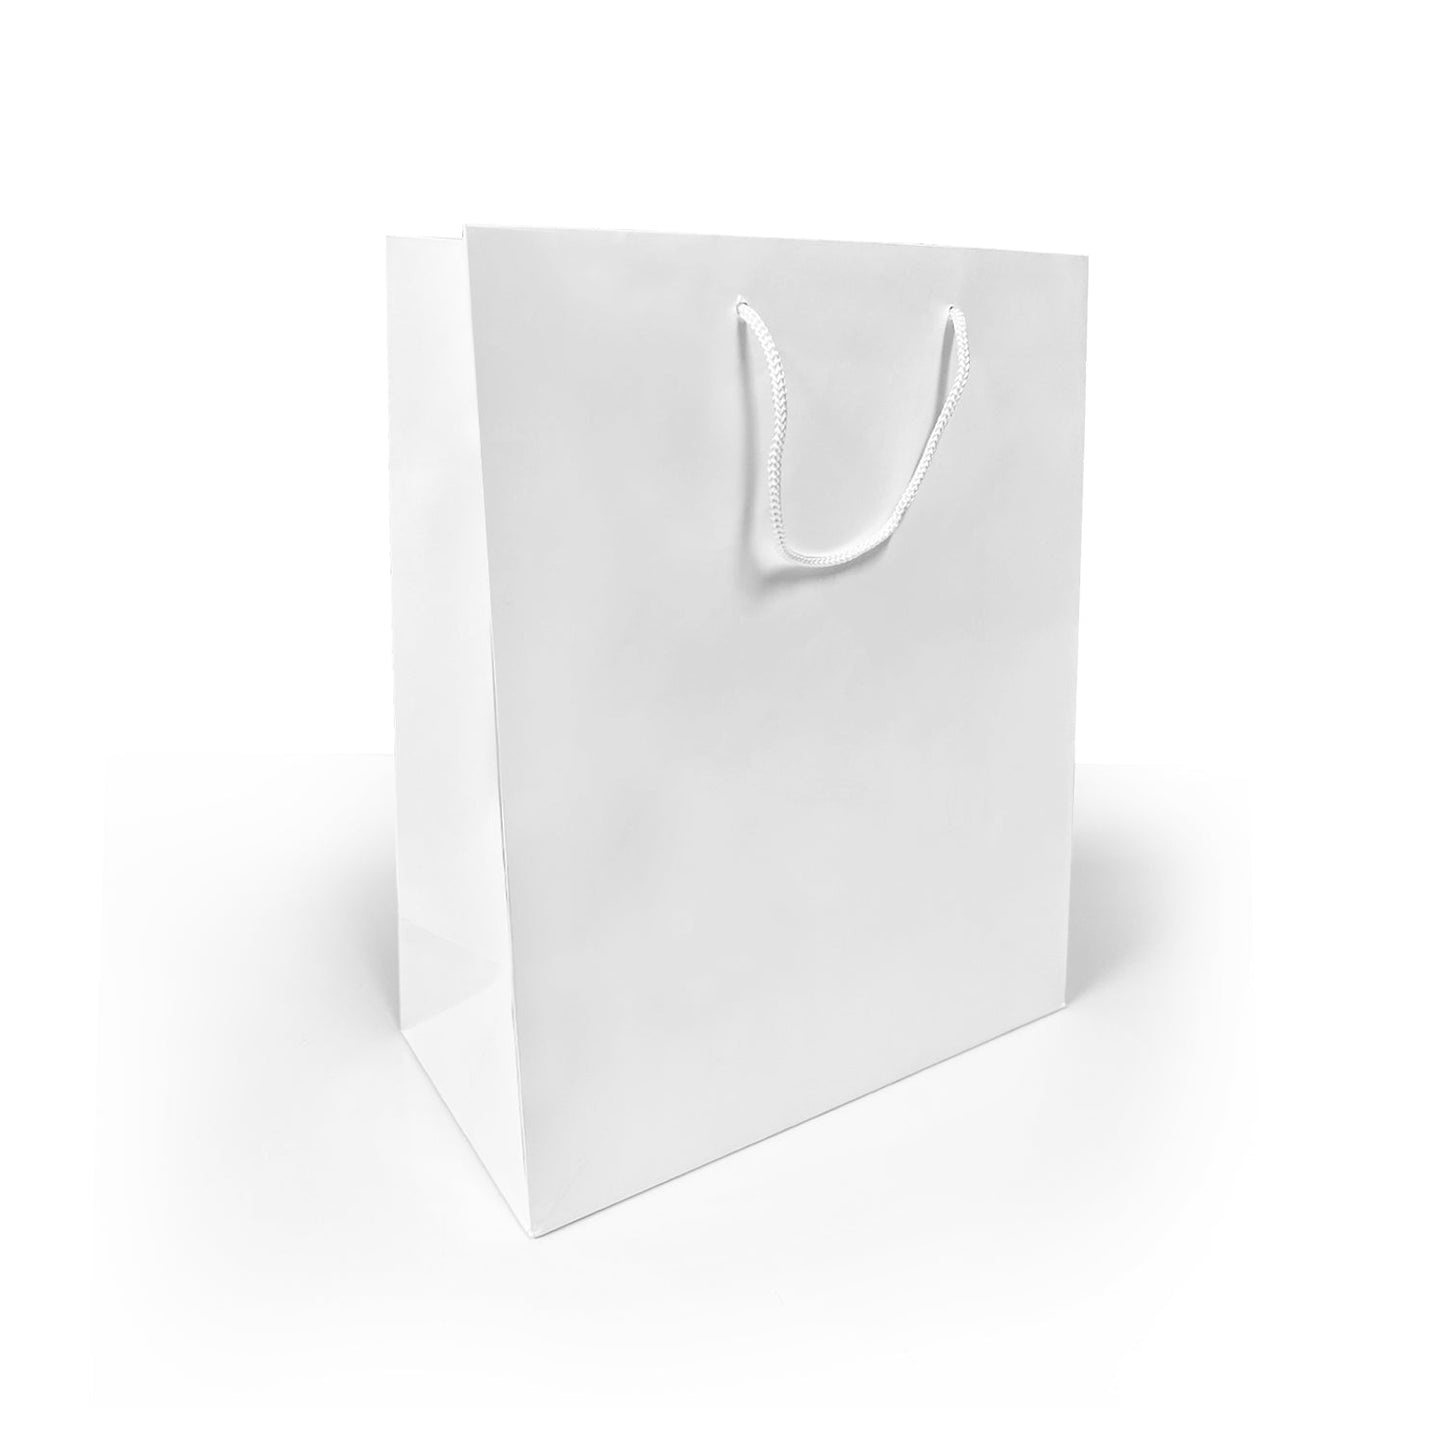 150 Pcs, Debbie,  10x5x13 inches, White Euro Tote Paper Bags, with Rope Handle